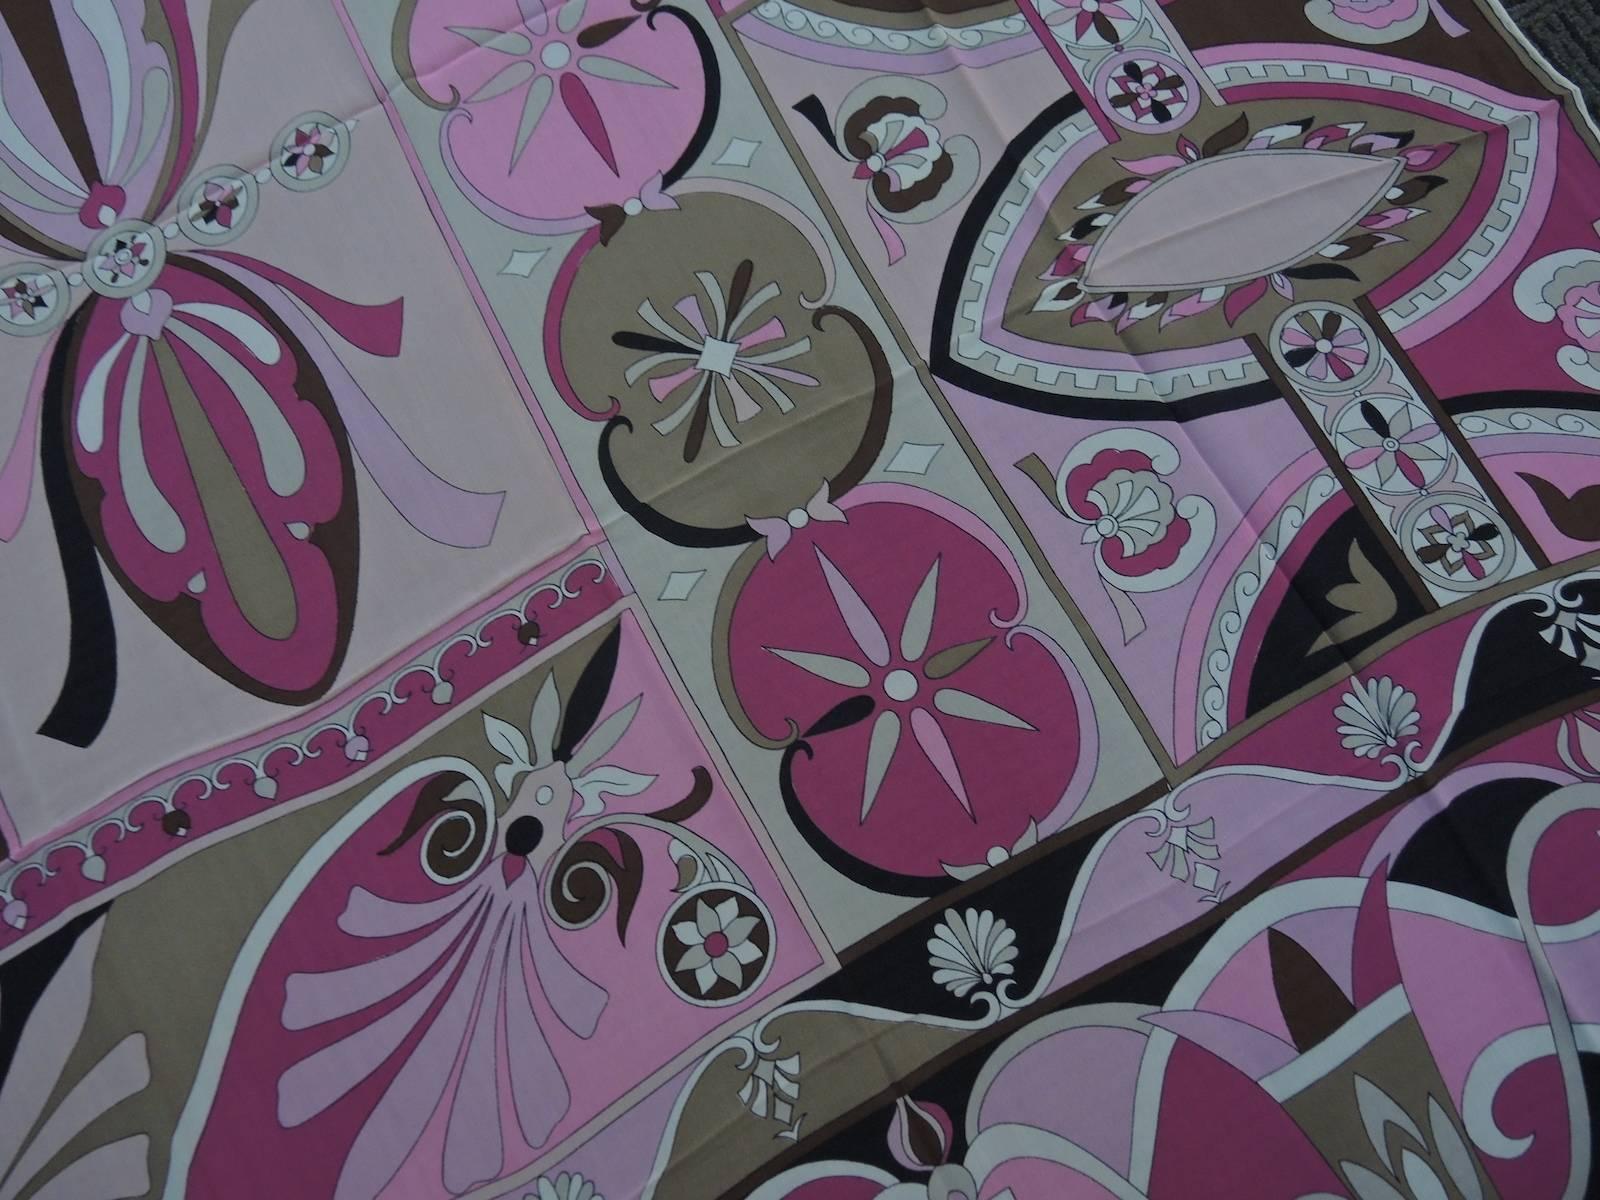 This Emilio Pucci scarf has the multi-color blend of pink, black, white and brown colors that Pucci is famous for.  This lovely 100% silk scarf signed “Emilio” is a must have for your collection of scarves!  It measures 2’9” x 2’9” and is in